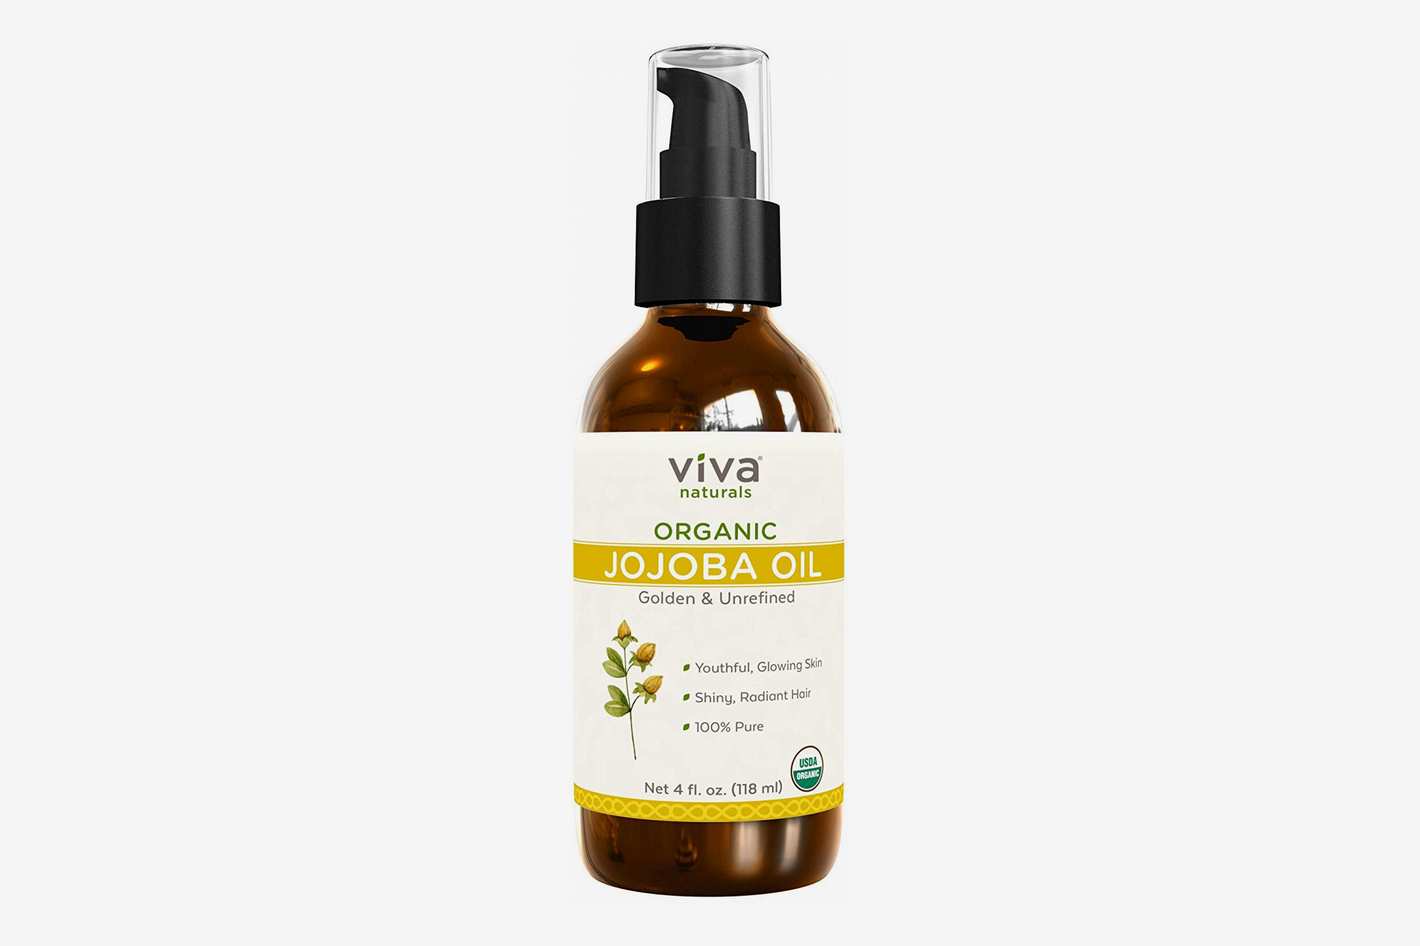 Viva Naturals certified organically grown jojoba oil 100% pure and cold pressed